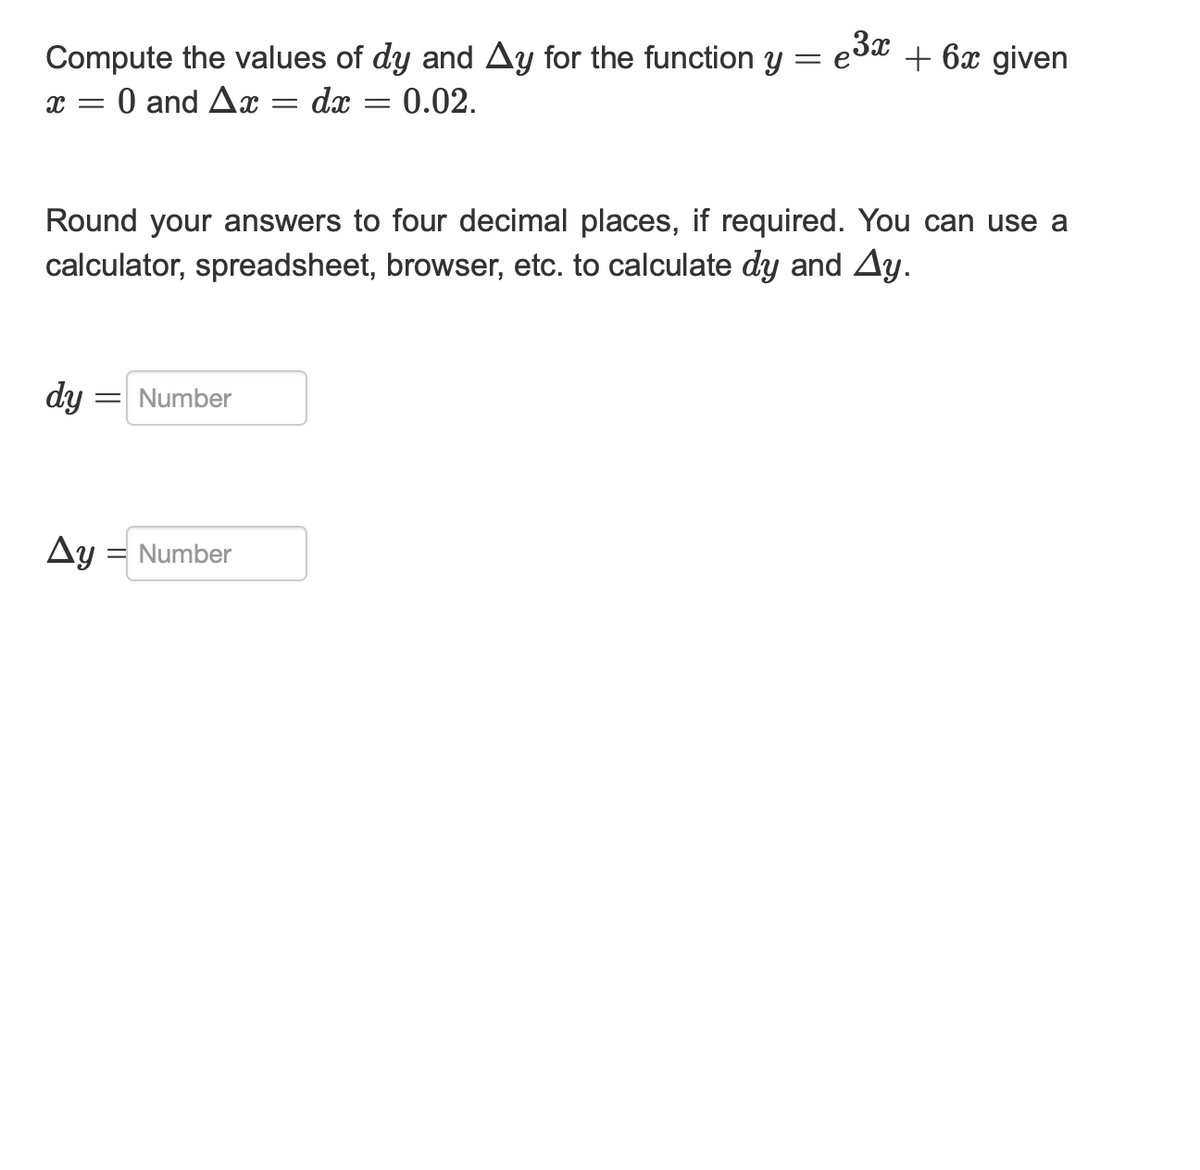 Compute the values of dy and Ay for the function y = e³x + 6x given
X = 0 and Ax= = dx 0.02.
Round your answers to four decimal places, if required. You can use a
calculator, spreadsheet, browser, etc. to calculate dy and Ay.
dy = Number
Ay = Number